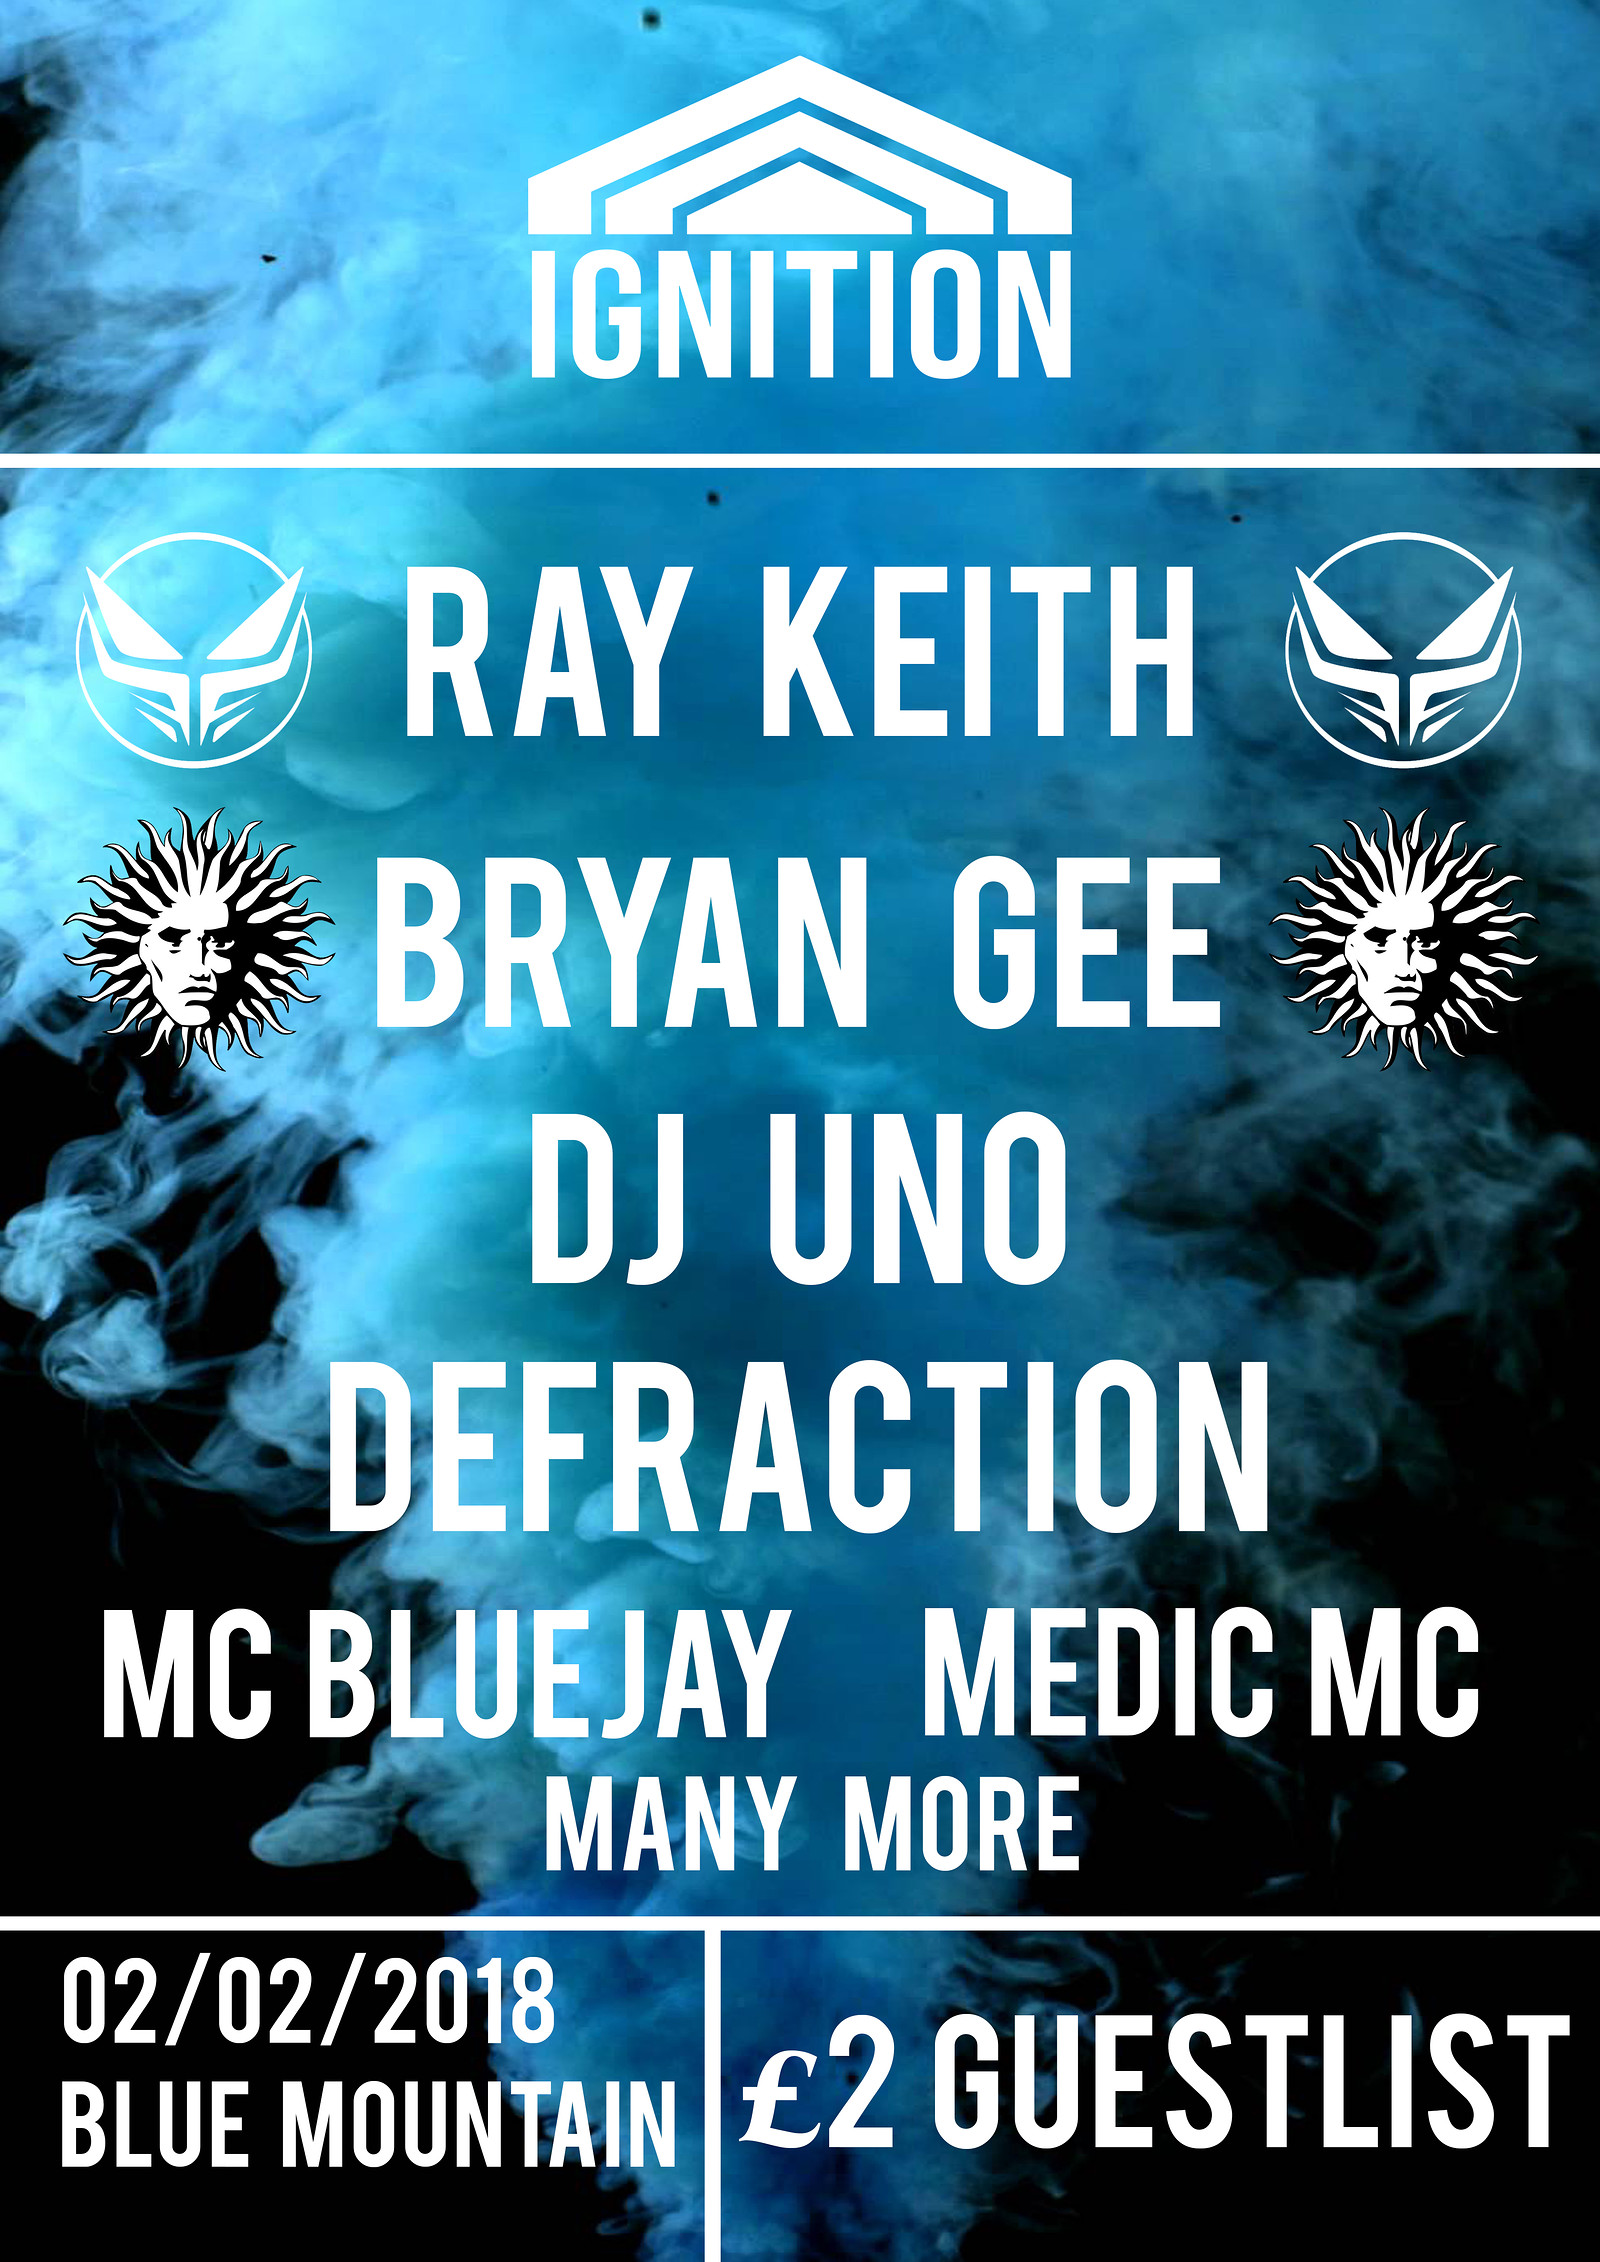 Ignition Presents: Ray Keith & Bryan Gee at Blue Mountain